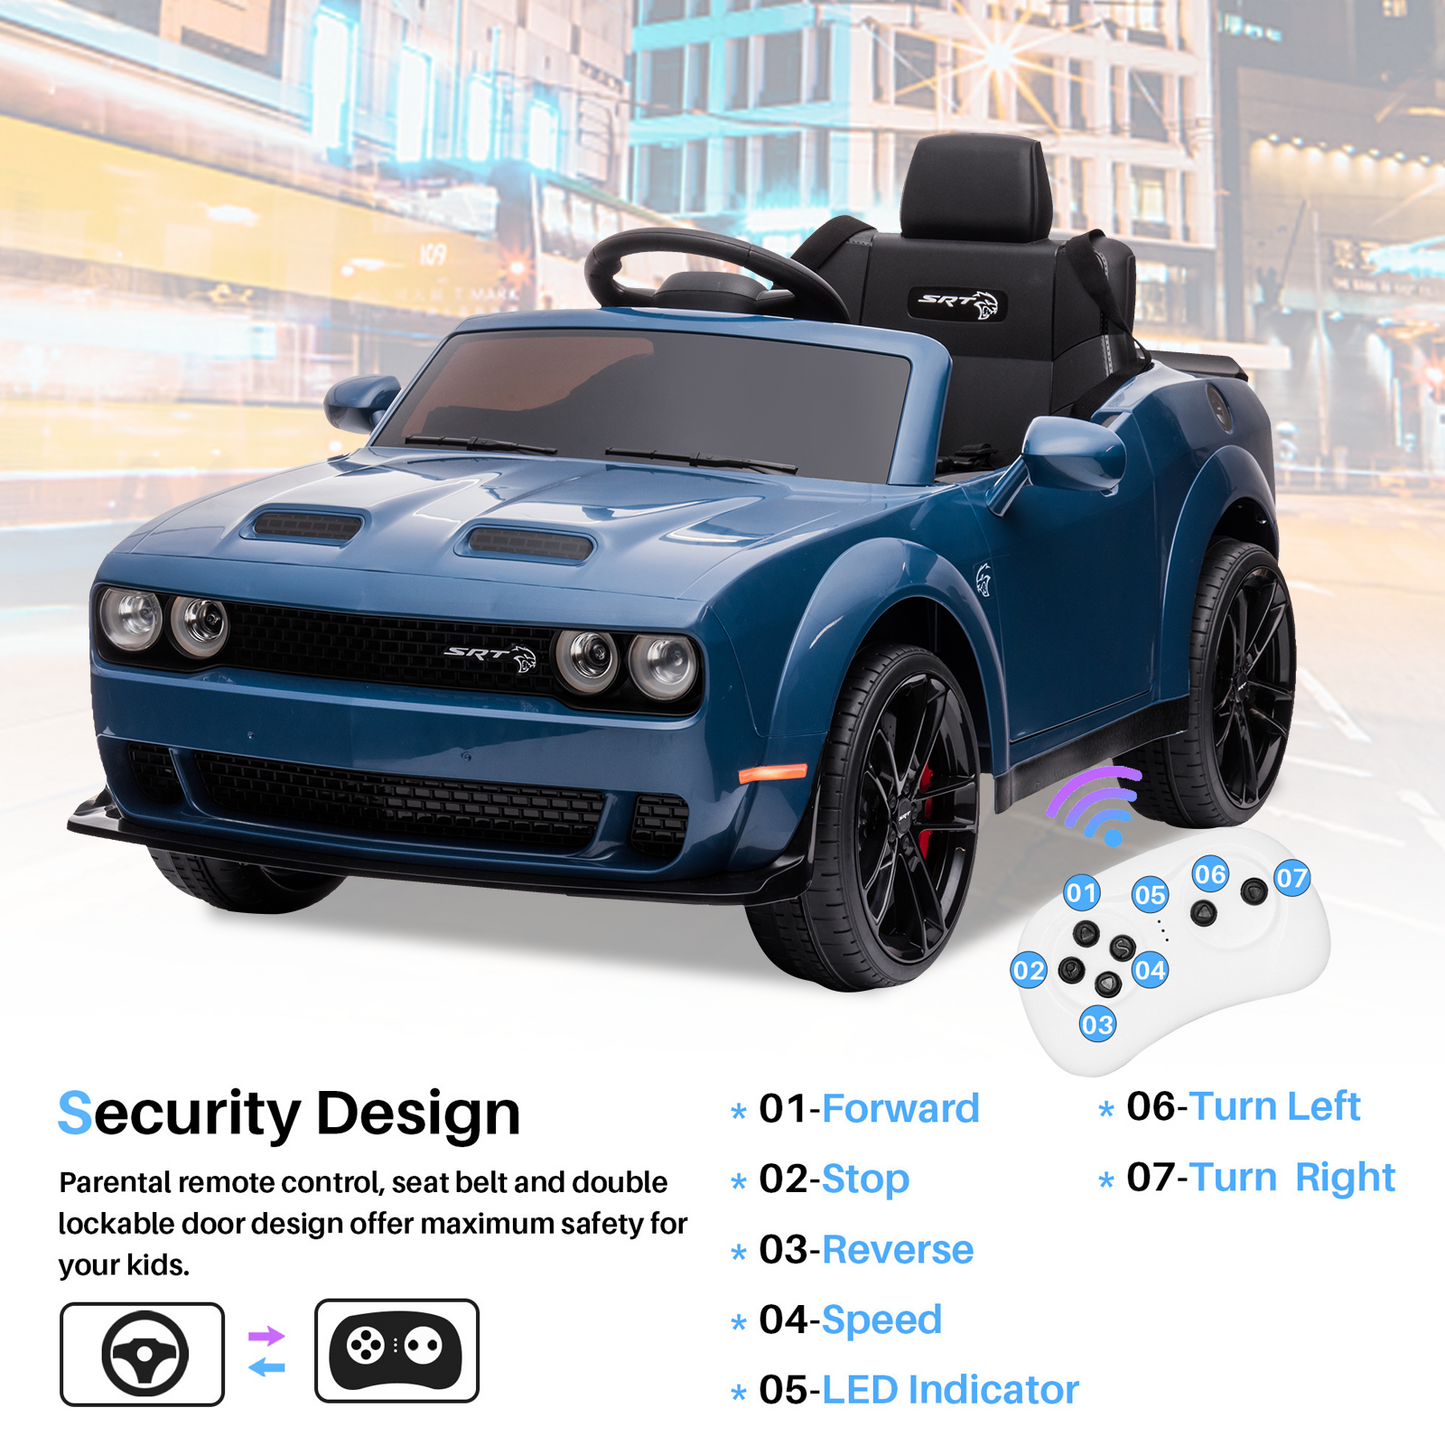 Power Dodge Challenger SRT Ride on Toy, 12 Volt Battery Powered Electric Car with Remote Control, Horn, LED Lights, USB Port for Boys Girls Birthday Gift, Blue